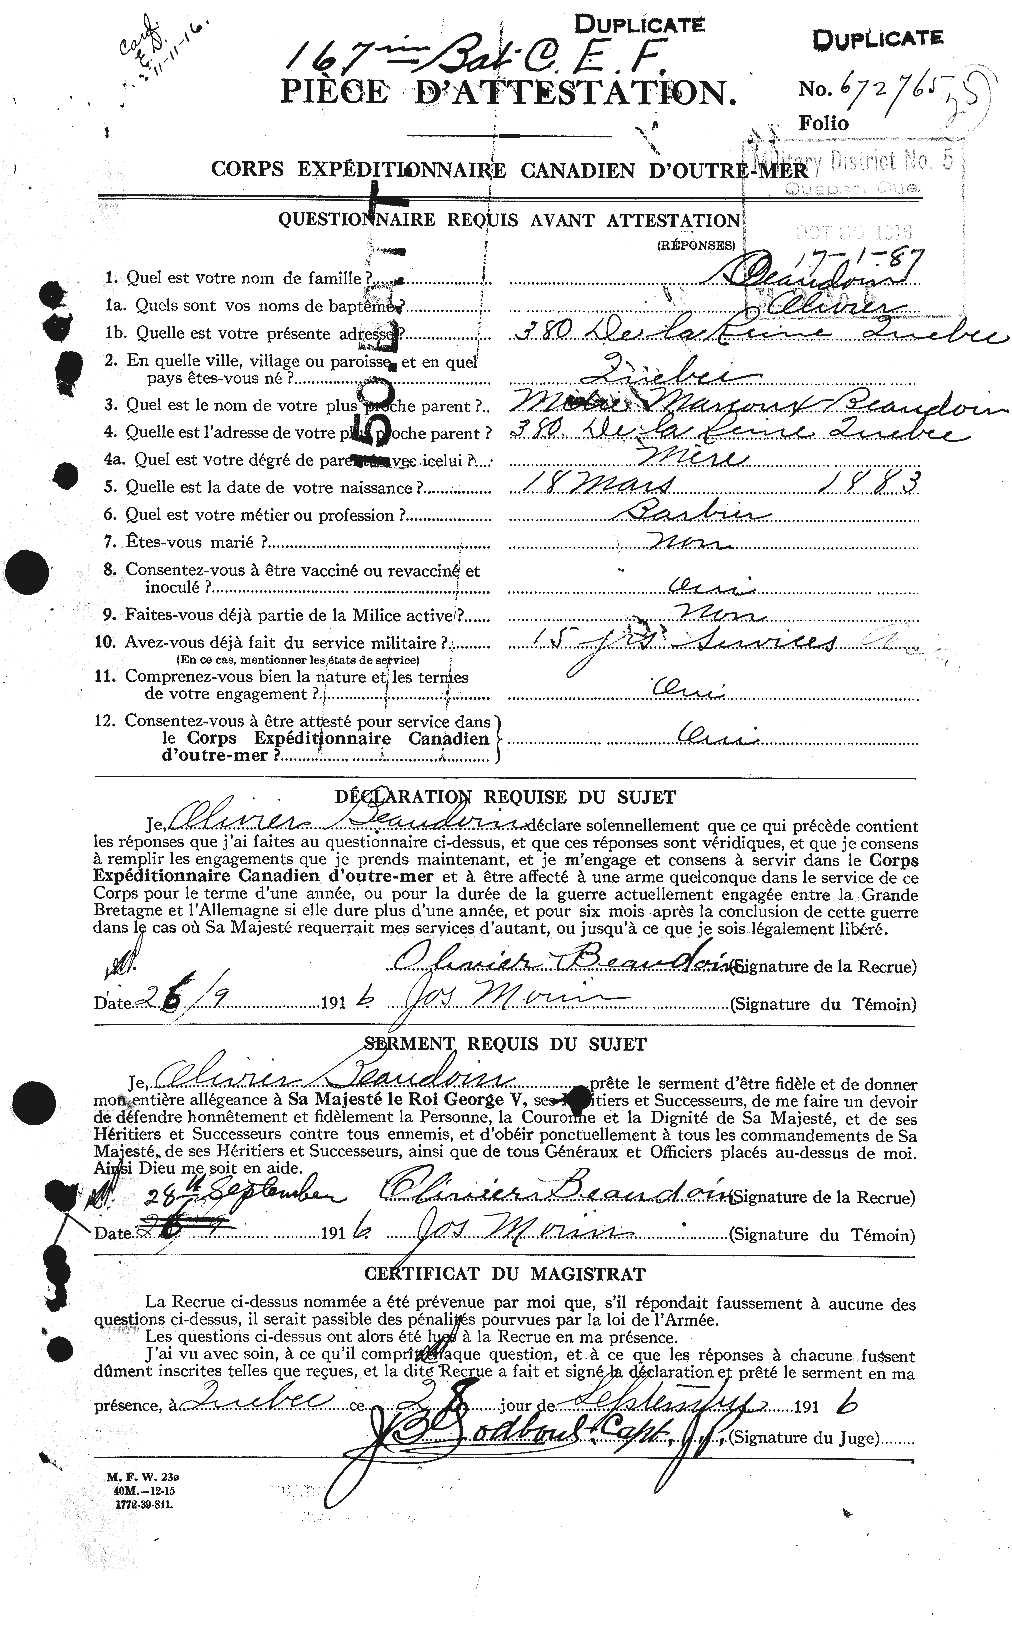 Personnel Records of the First World War - CEF 231281a